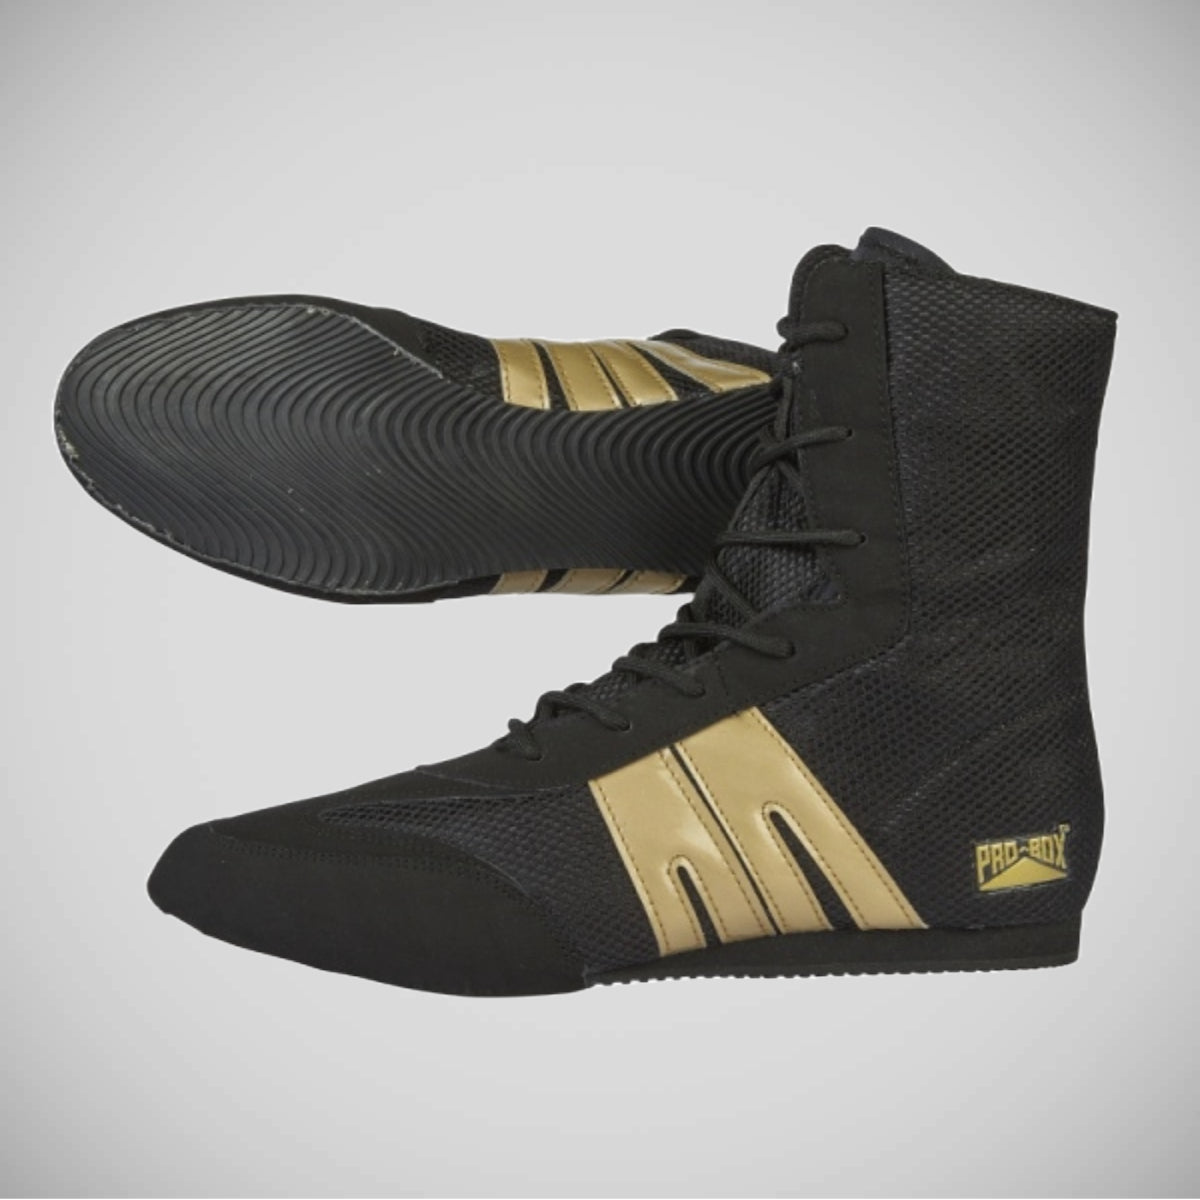 Black/Gold Pro-Box Classic Boxing Boots from Made4Fighters